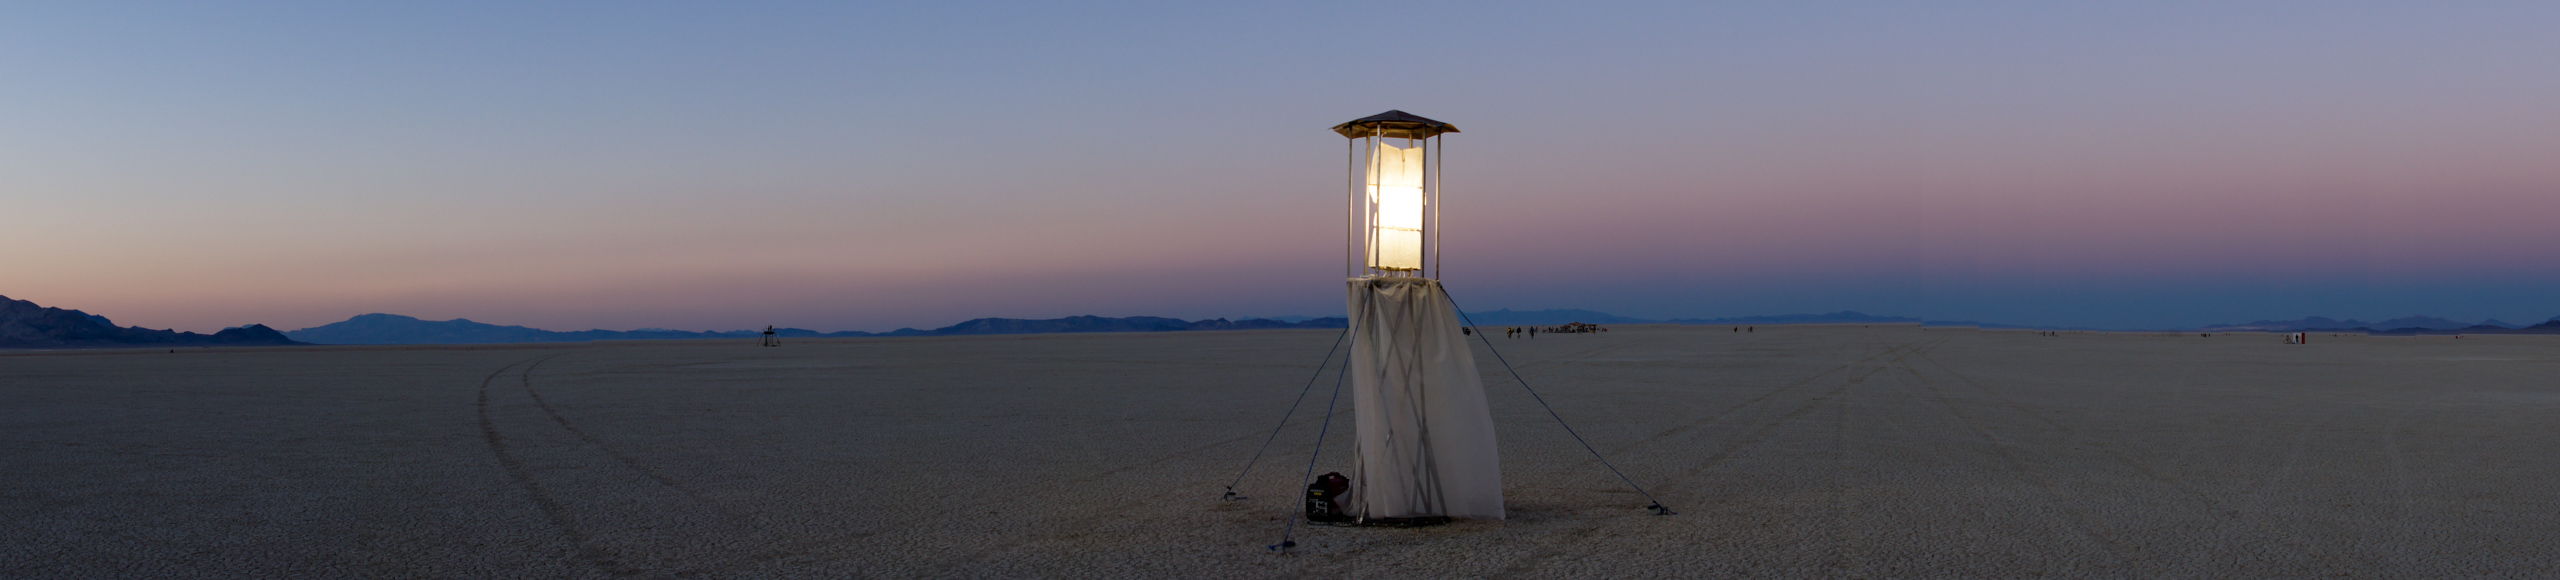 Snow QueenMy installation is a "lighthouse." The lens is a glass cast of a dress, cast in 12 parts. The tower is steel, and the skirt is chiffon that would blow beautifully in the playa wind (made by Elizabeth Serrano).